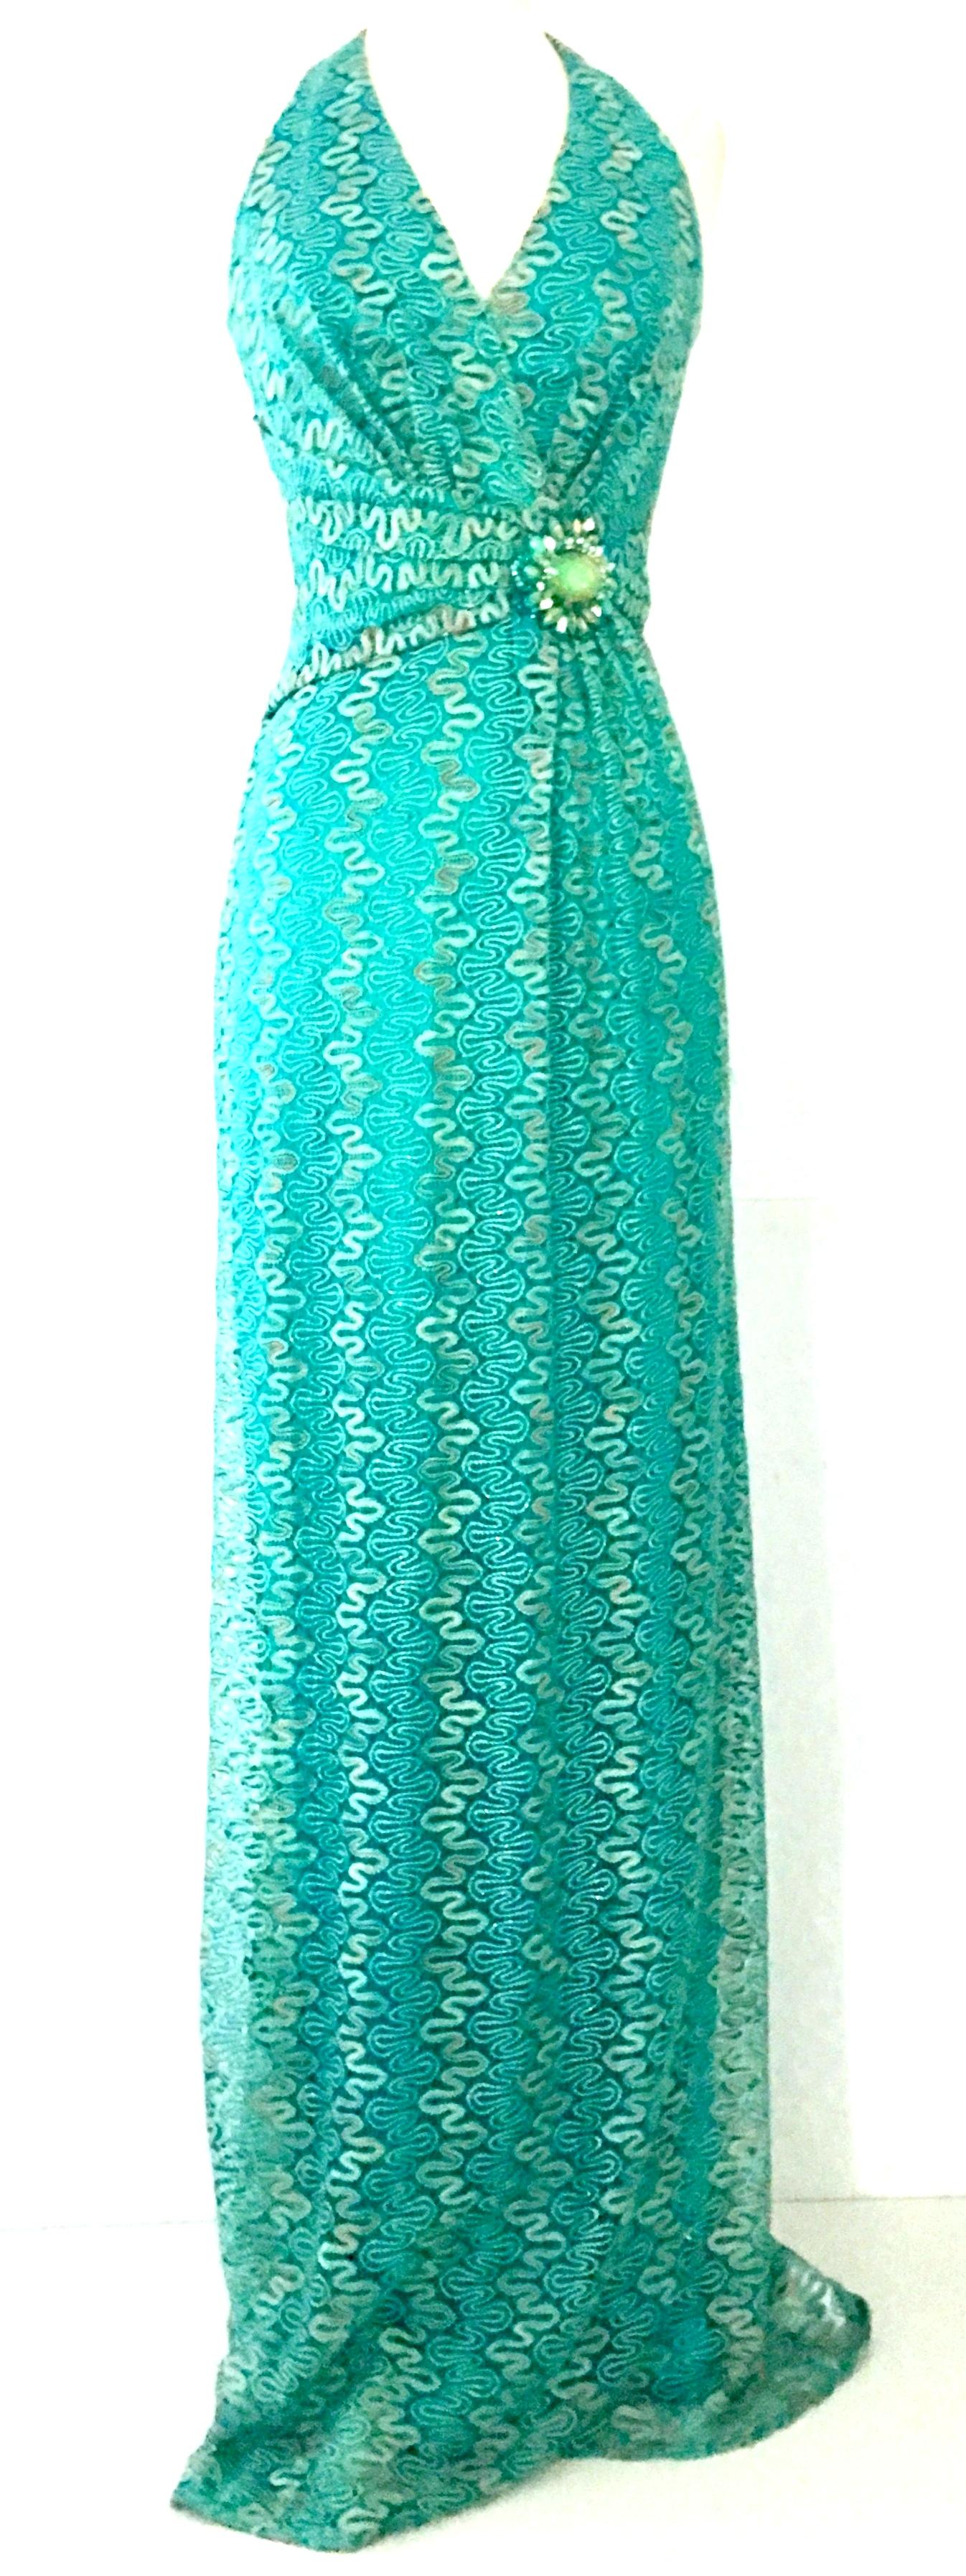 Contemporary & New With Tags, Missoni Style Maxi Halter Dress By, David Meister. Features a teal knit ground with silver metallic threading detail. The faux belt at the waist features a large 